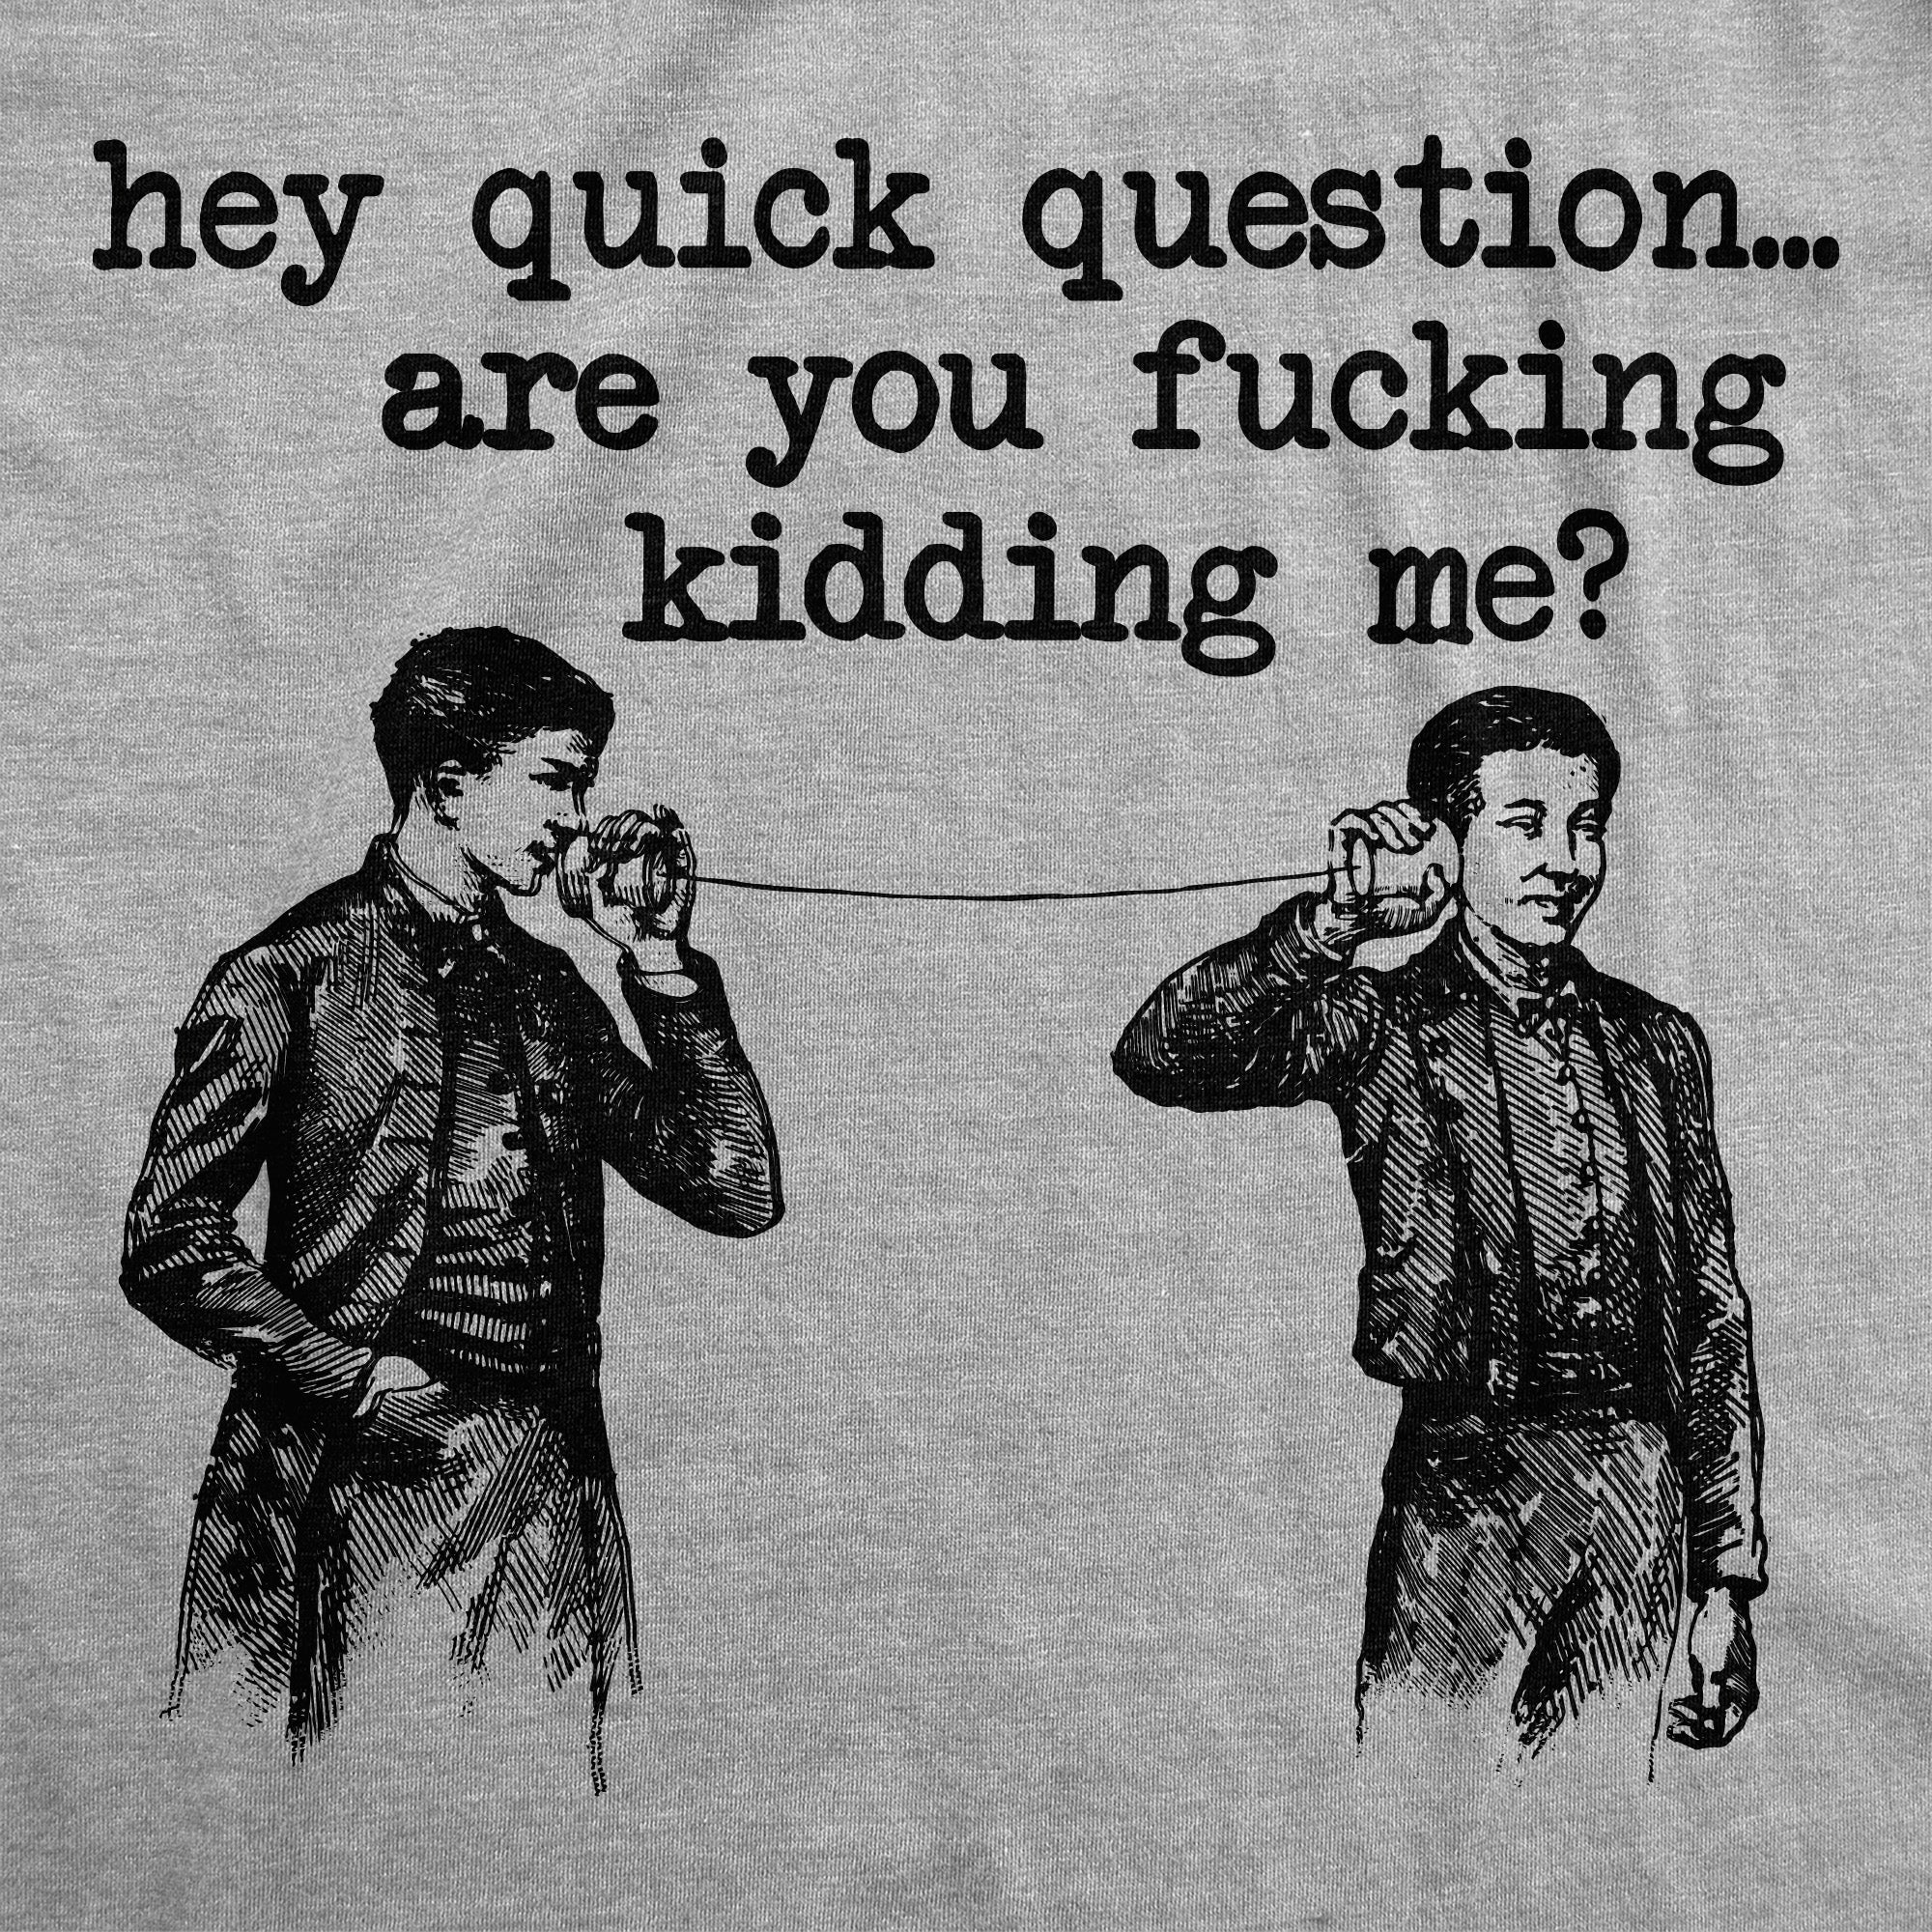 Funny Light Heather Grey - Are You Fucking Kidding Me Hey Quick Question Are You Fucking Kidding Me Mens T Shirt Nerdy sarcastic Tee